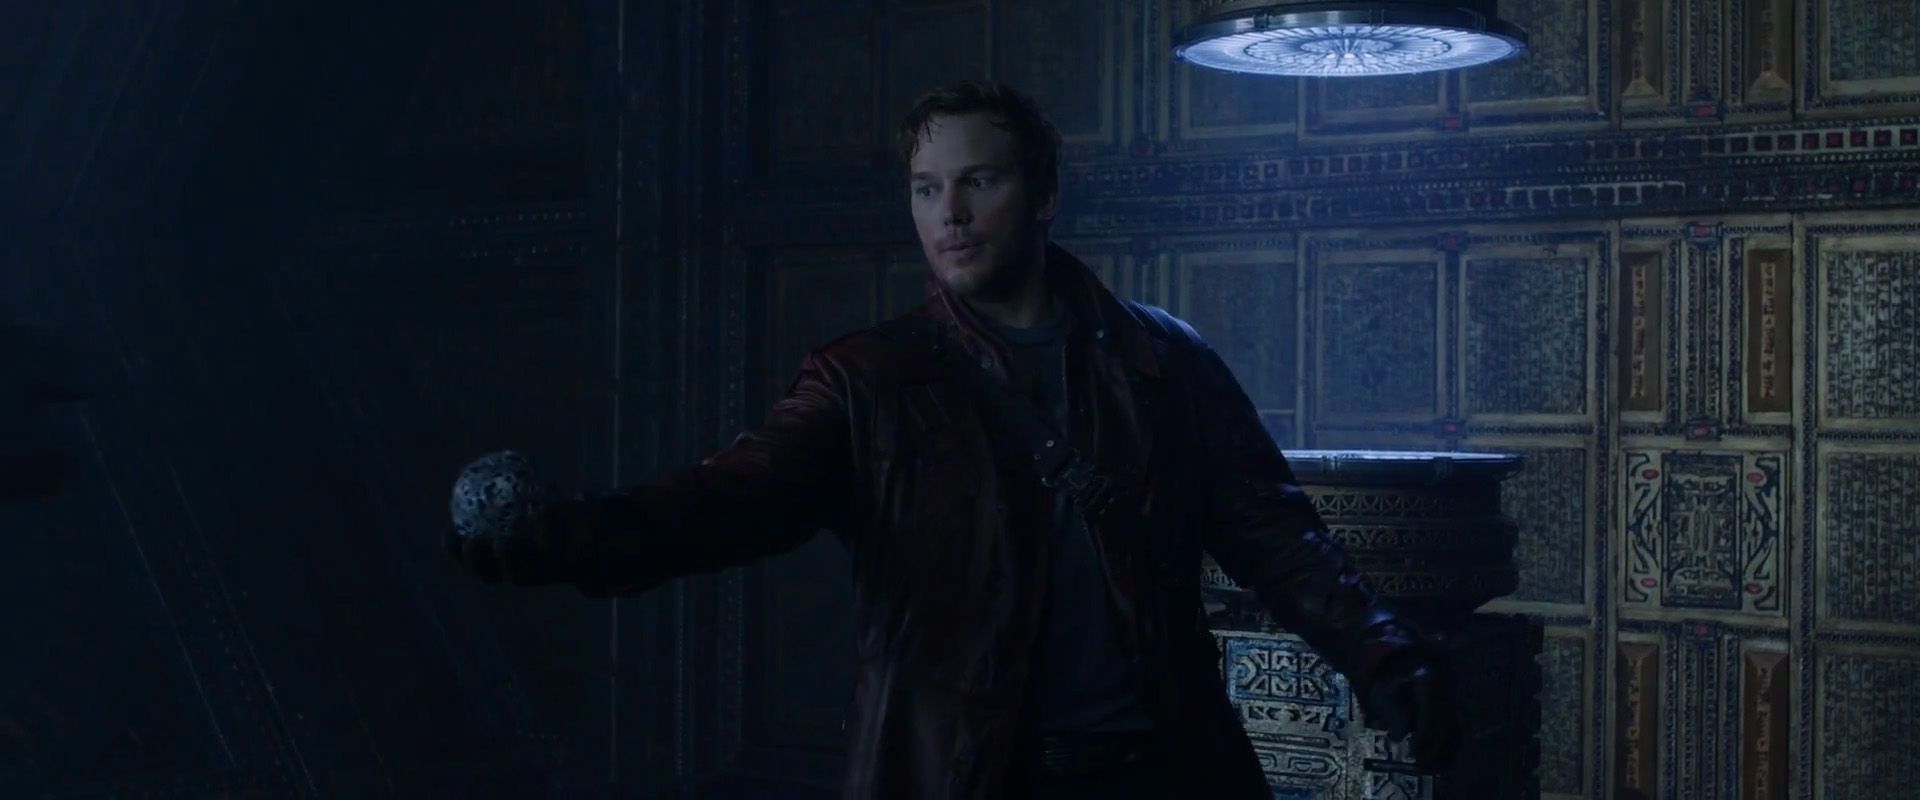 Guardians of the Galaxy Trailer - Peter Quill Drops Orb